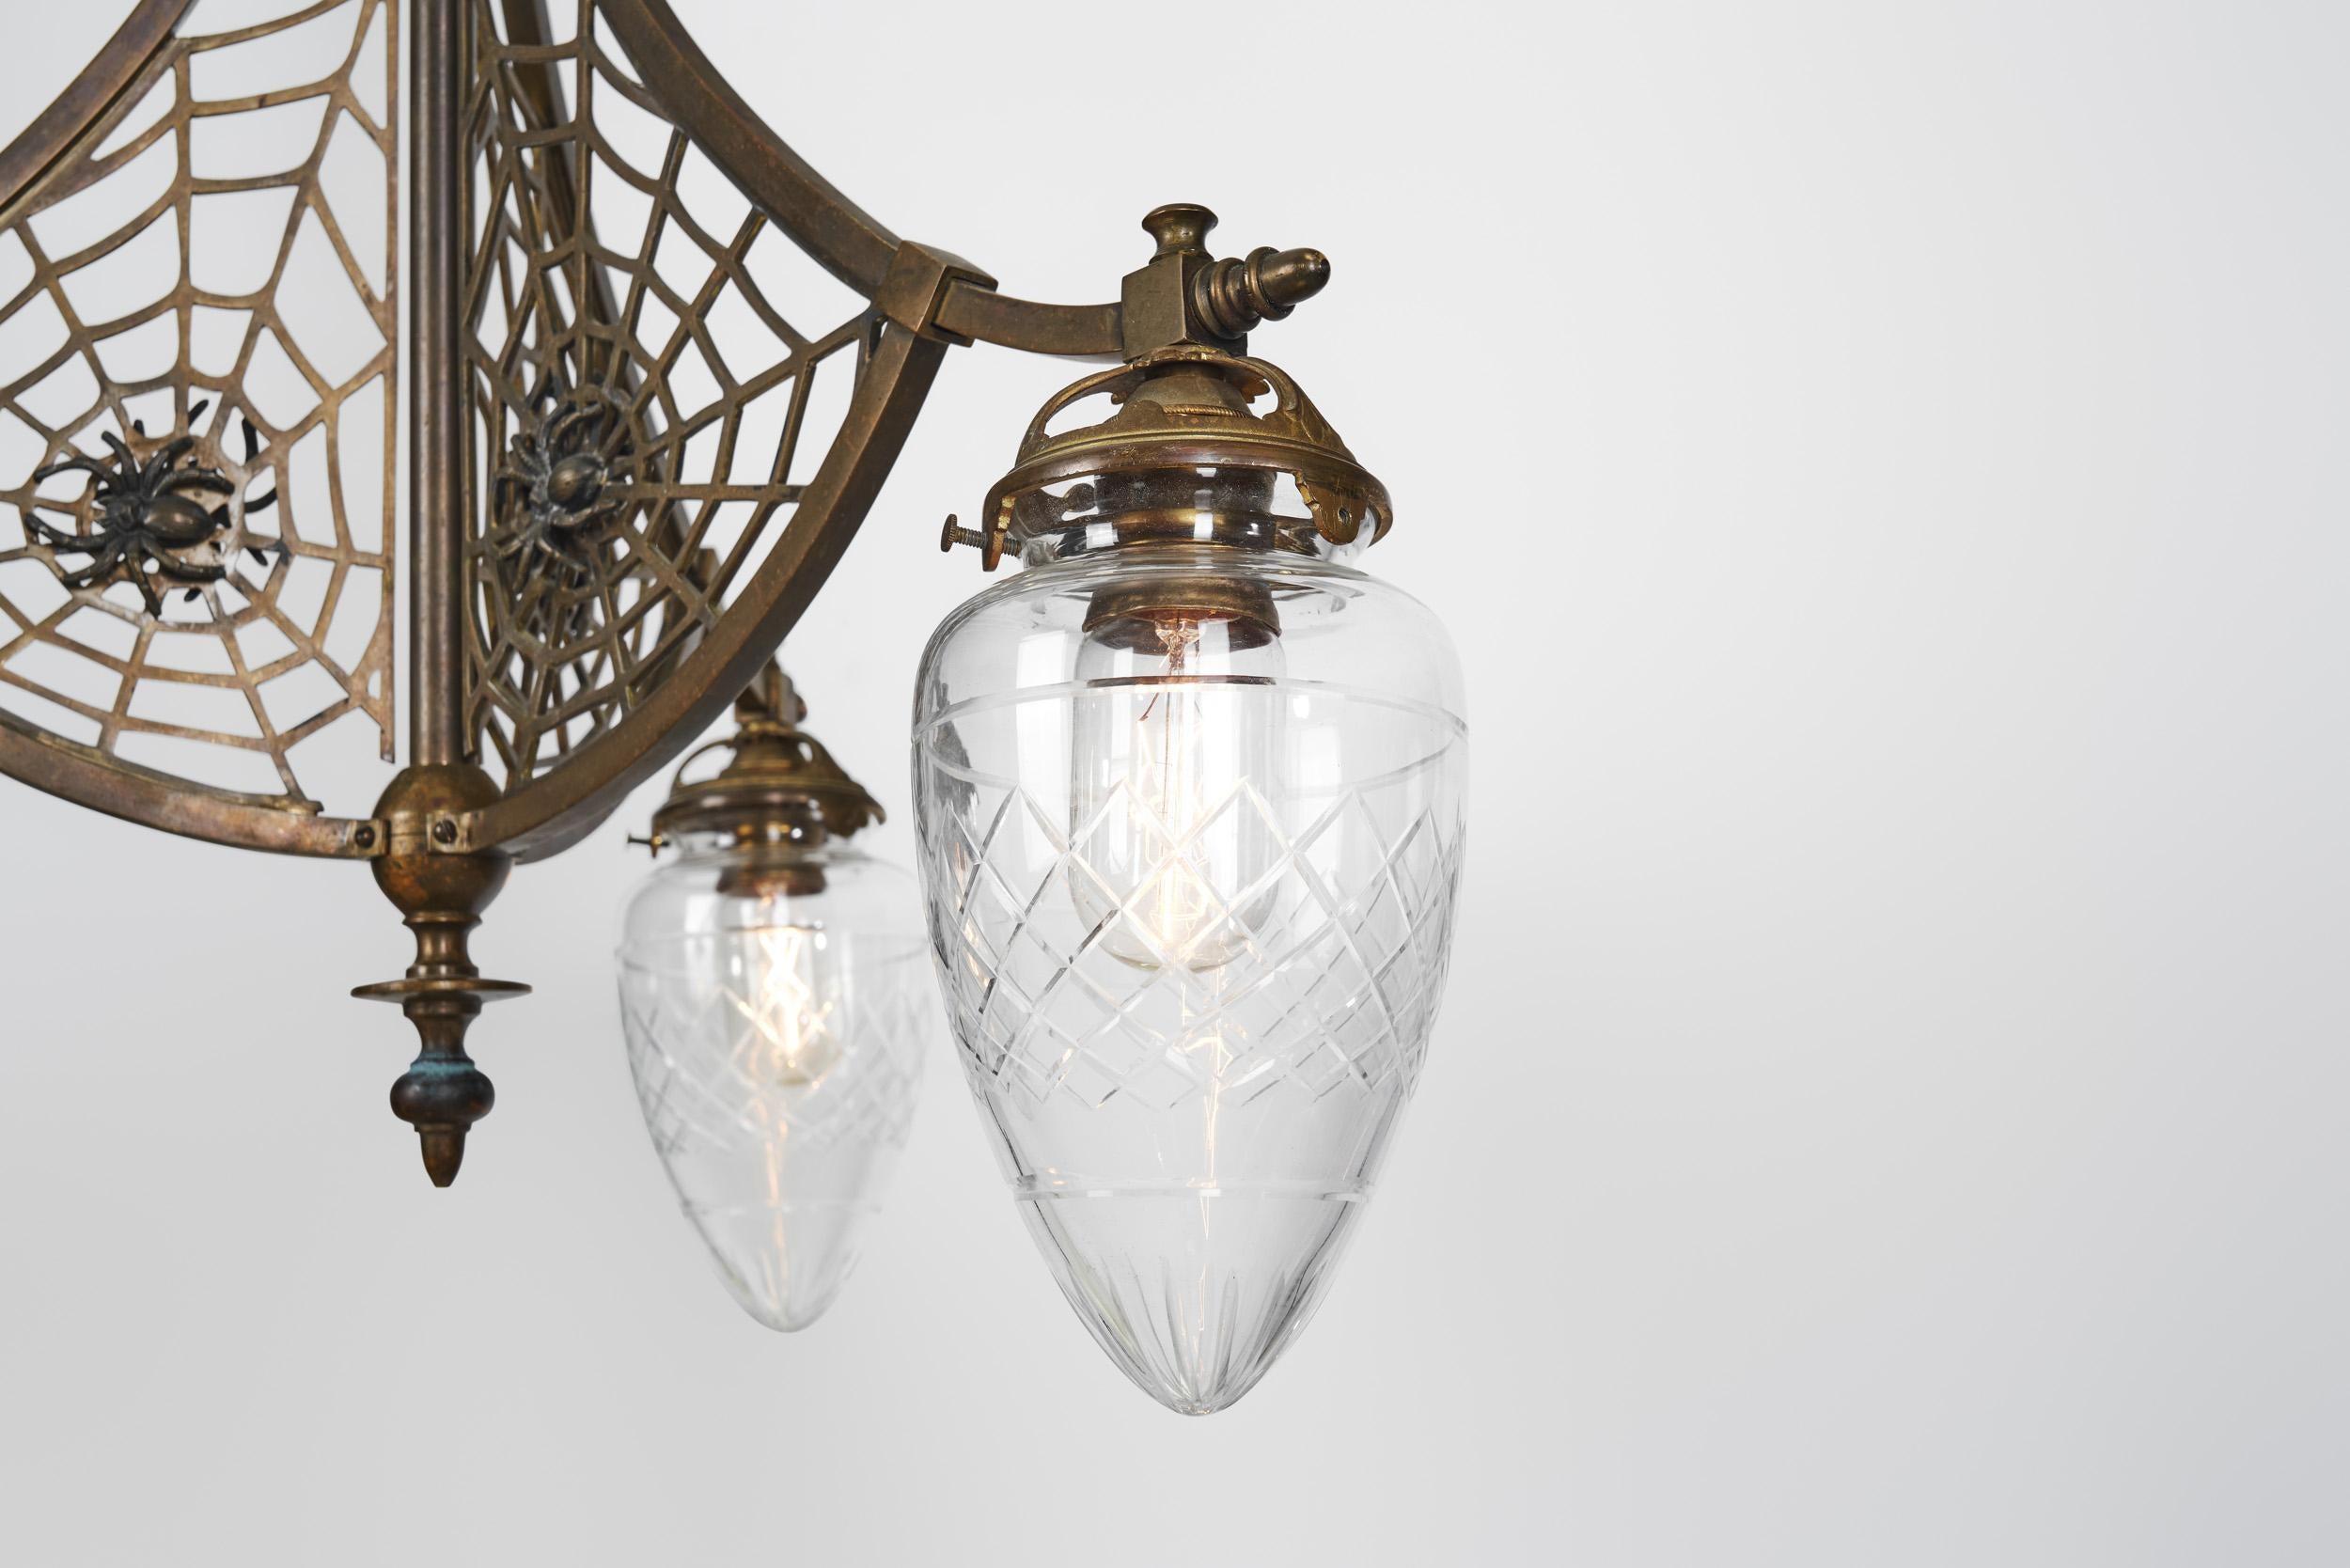 Art Nouveau Brass Ceiling Lamp with Glass Shades and Spider Nets, Europe 1900s For Sale 7